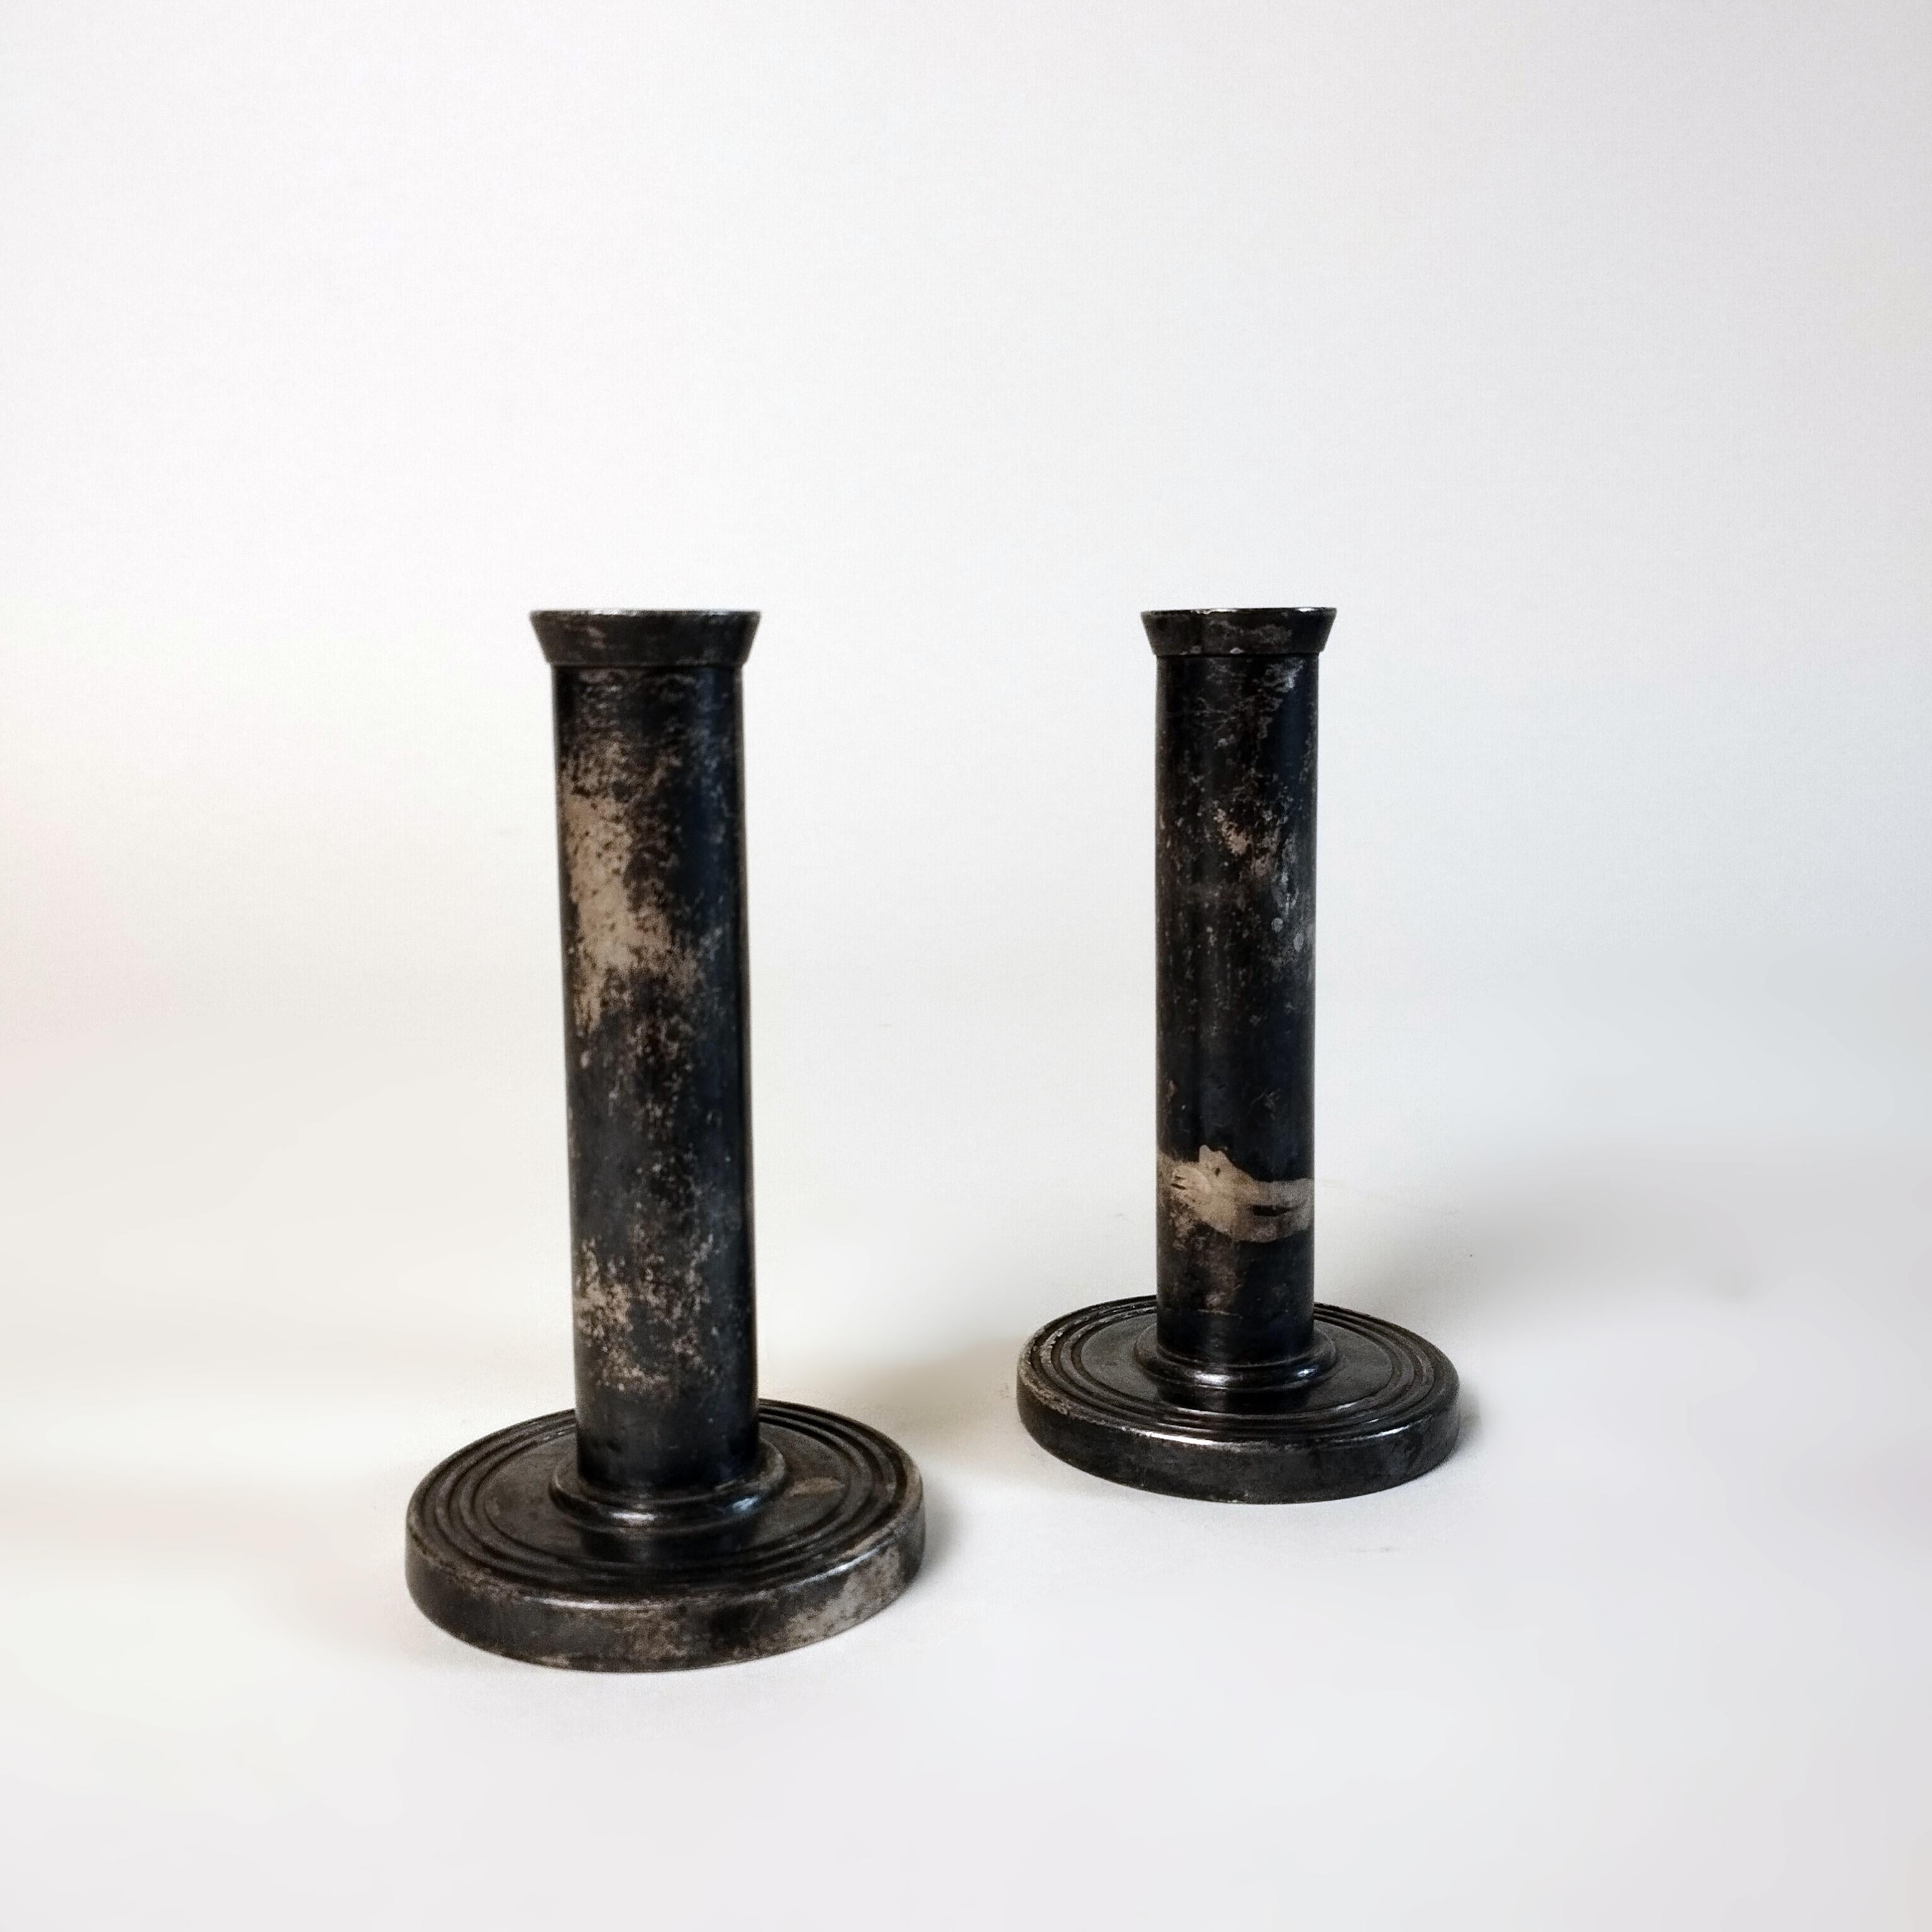 A pair of silverplate candlesticks in the style of Gio Ponti by Krupp Milano. The sticks have a flat cylindric design over a round fluted base. Sealed on the base.

The pair of candlesticks in being offered as is, with the stains of dirt on the